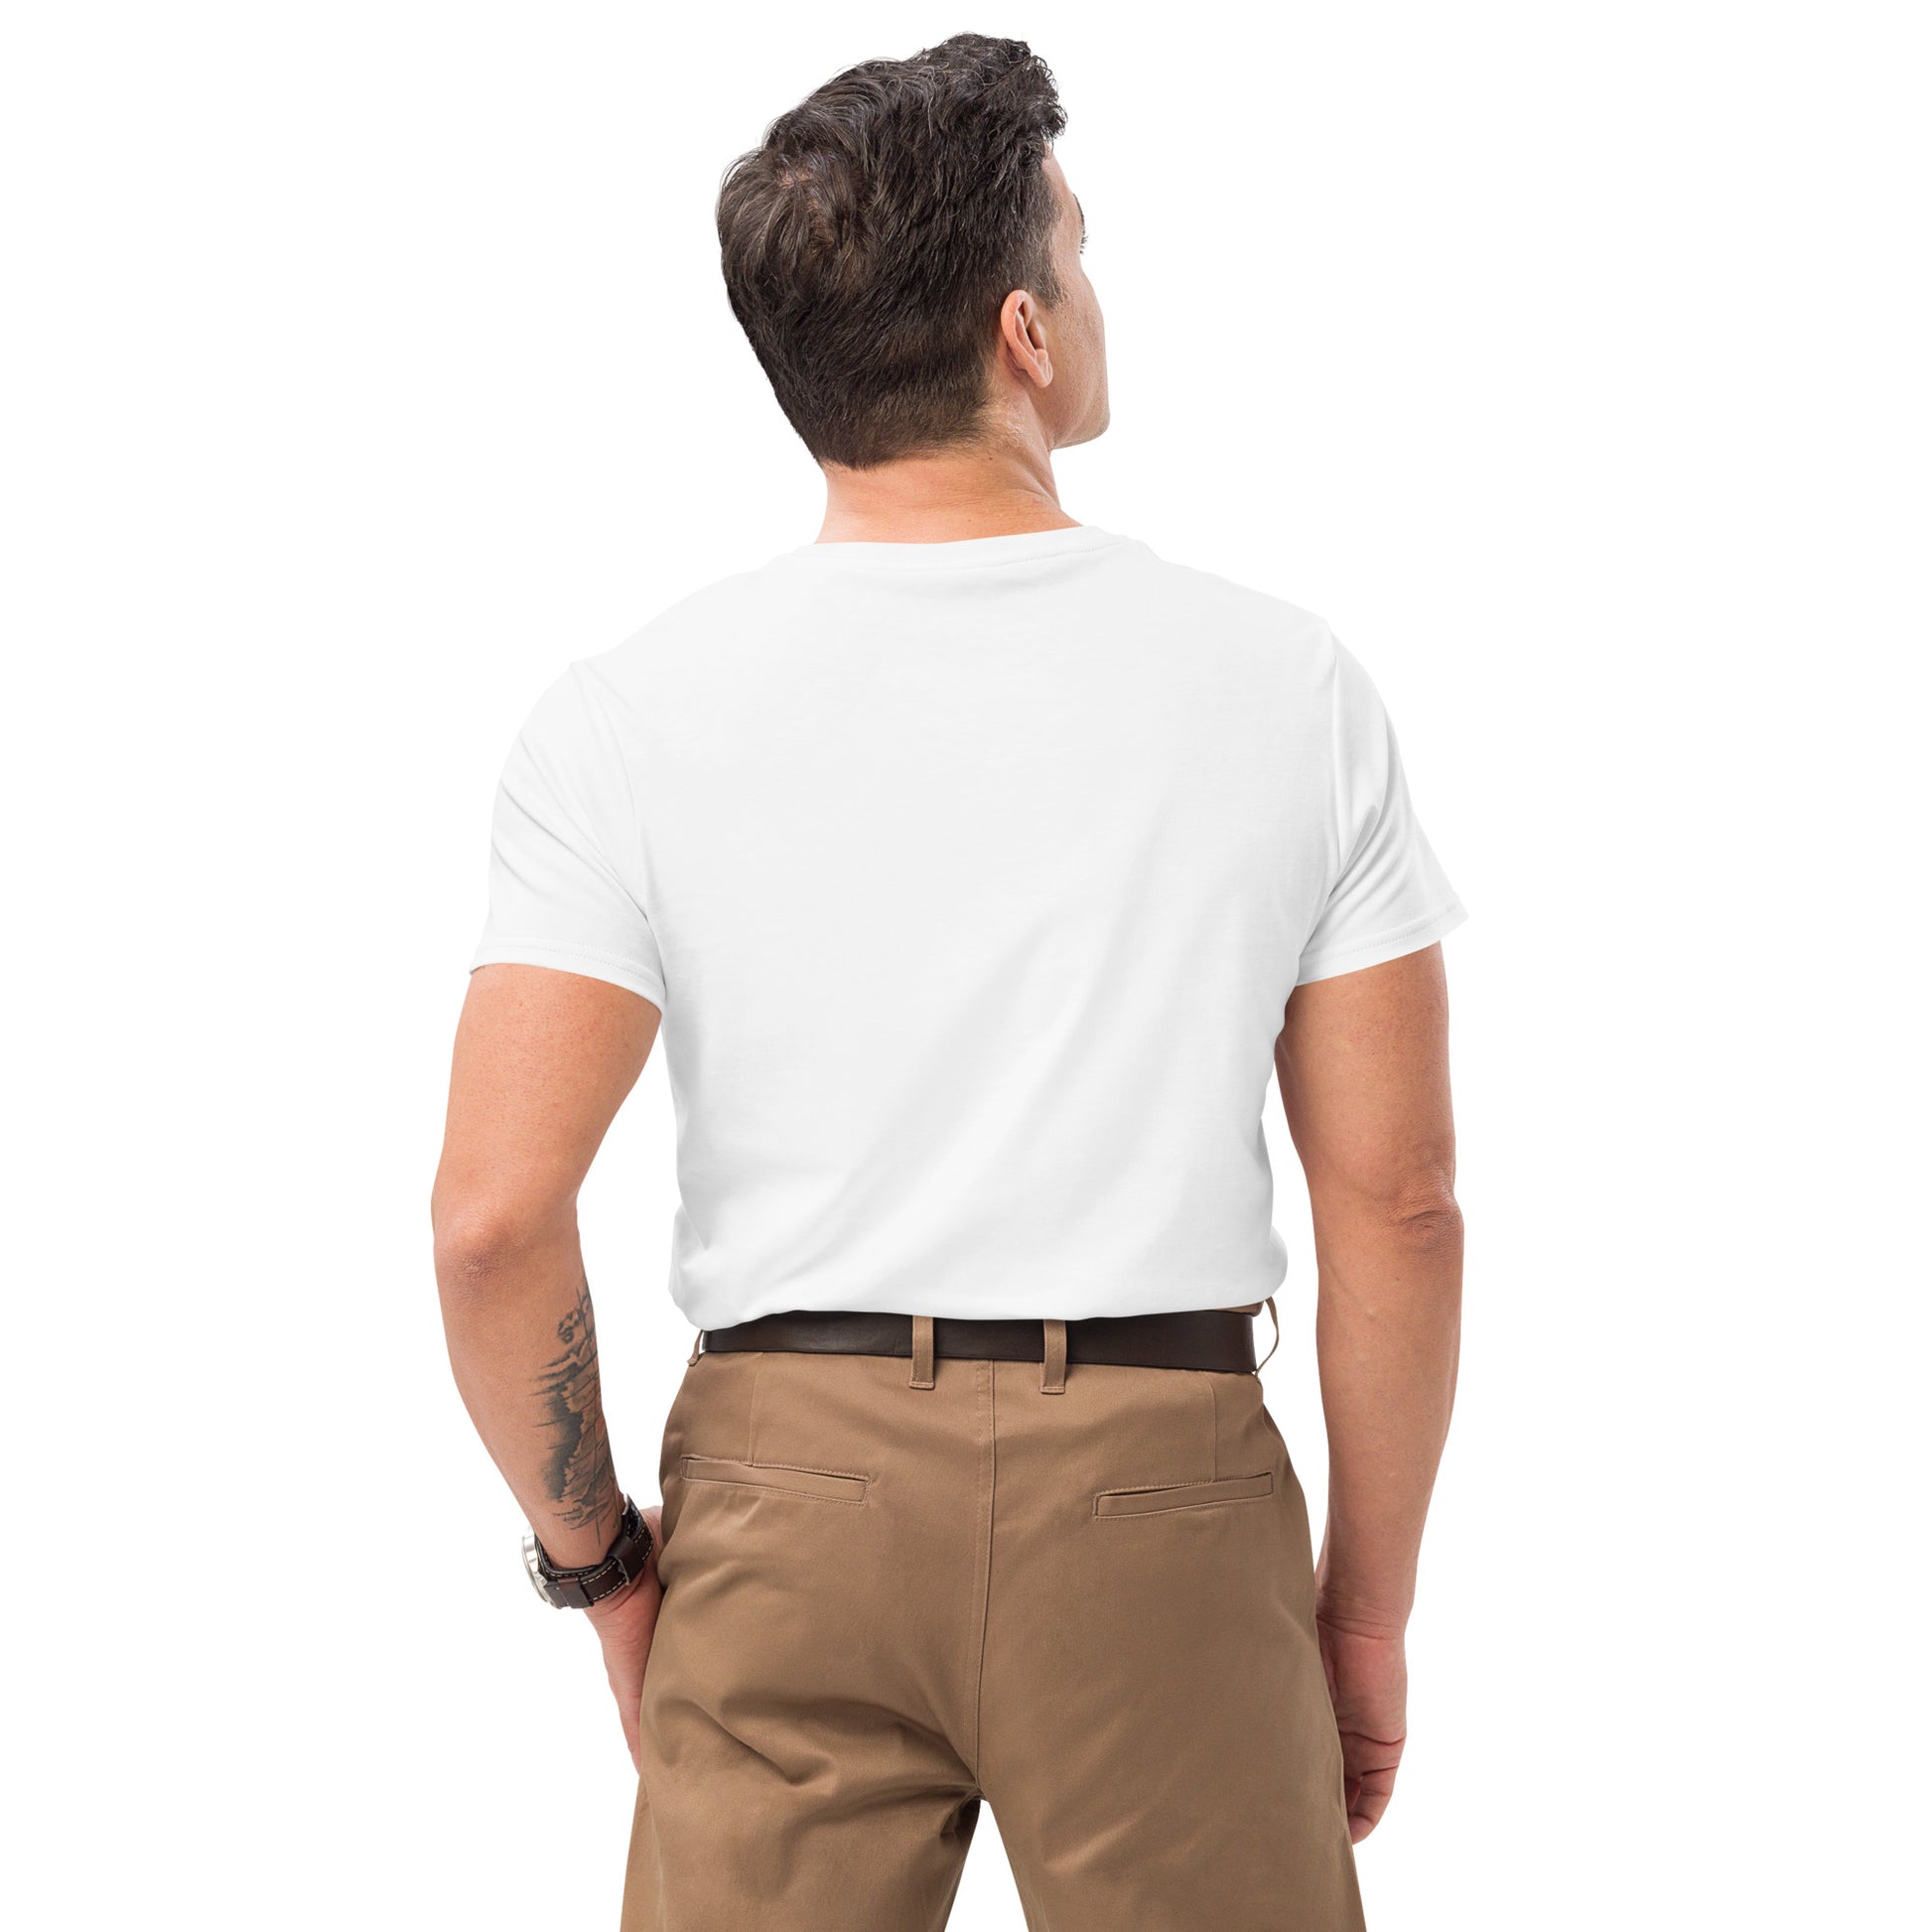 Back view of a white man wearing a white t-shirt